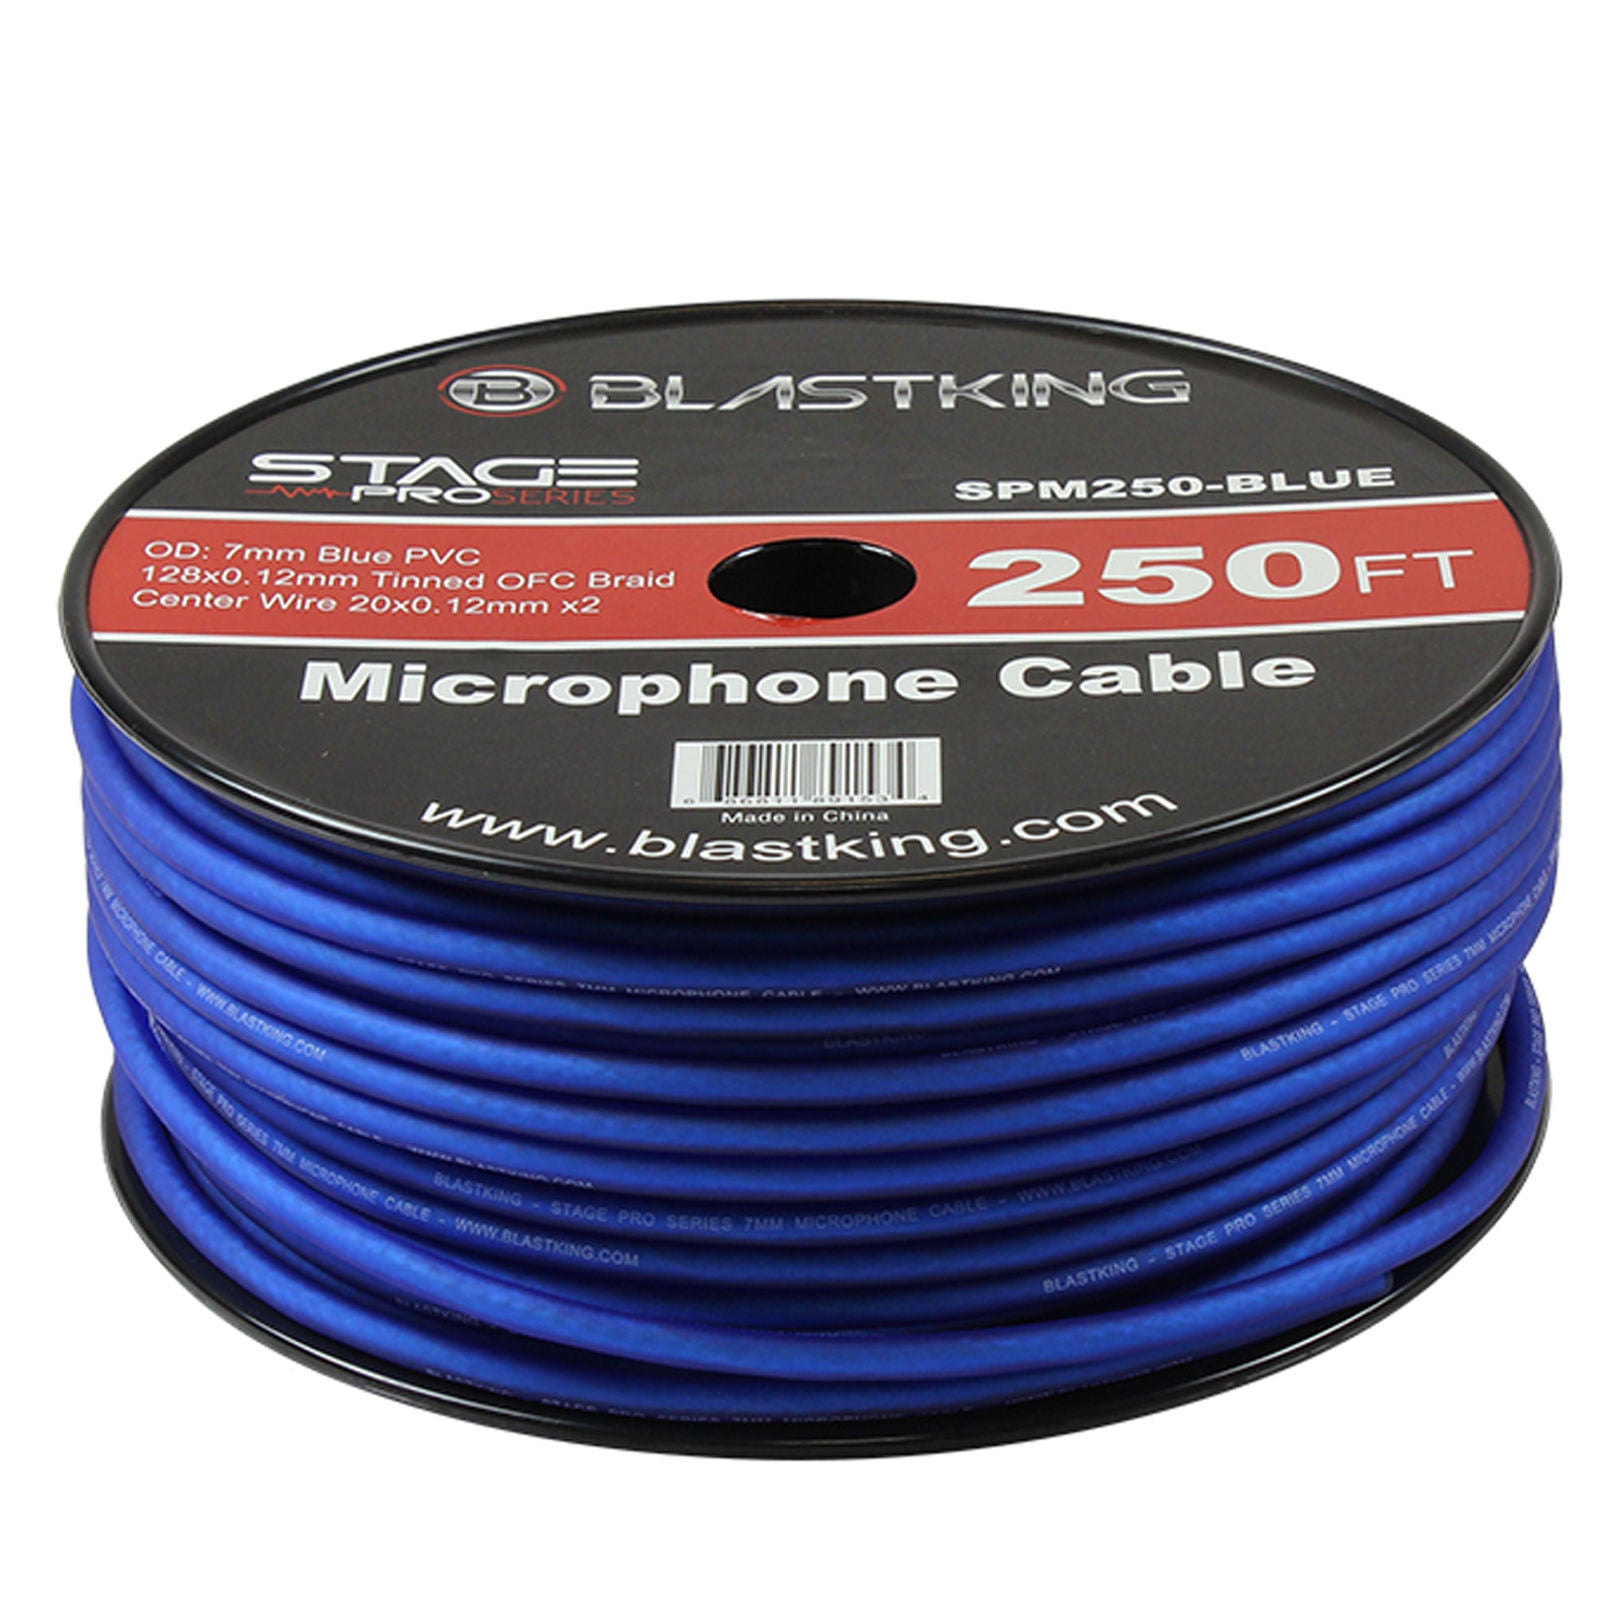 Blastking SPM250-BLUE 2-Conductor OFC Microphone Cable 250 Ft Blue